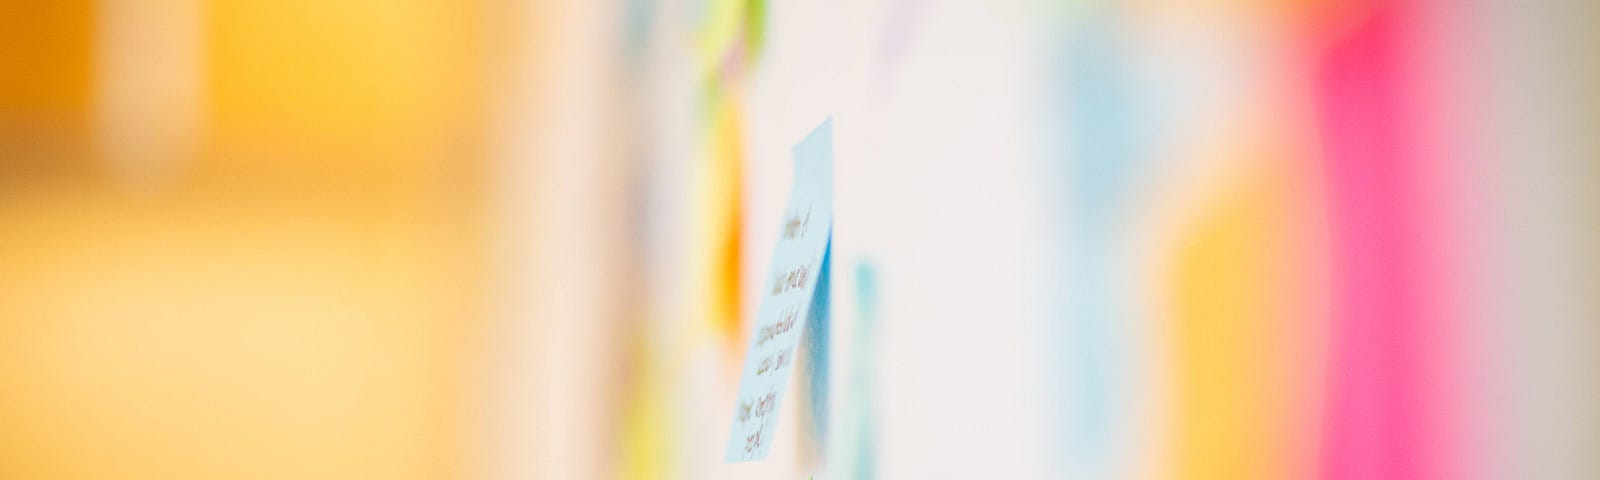 photo showing post it notes and ideas written on a wall in a workshop setting